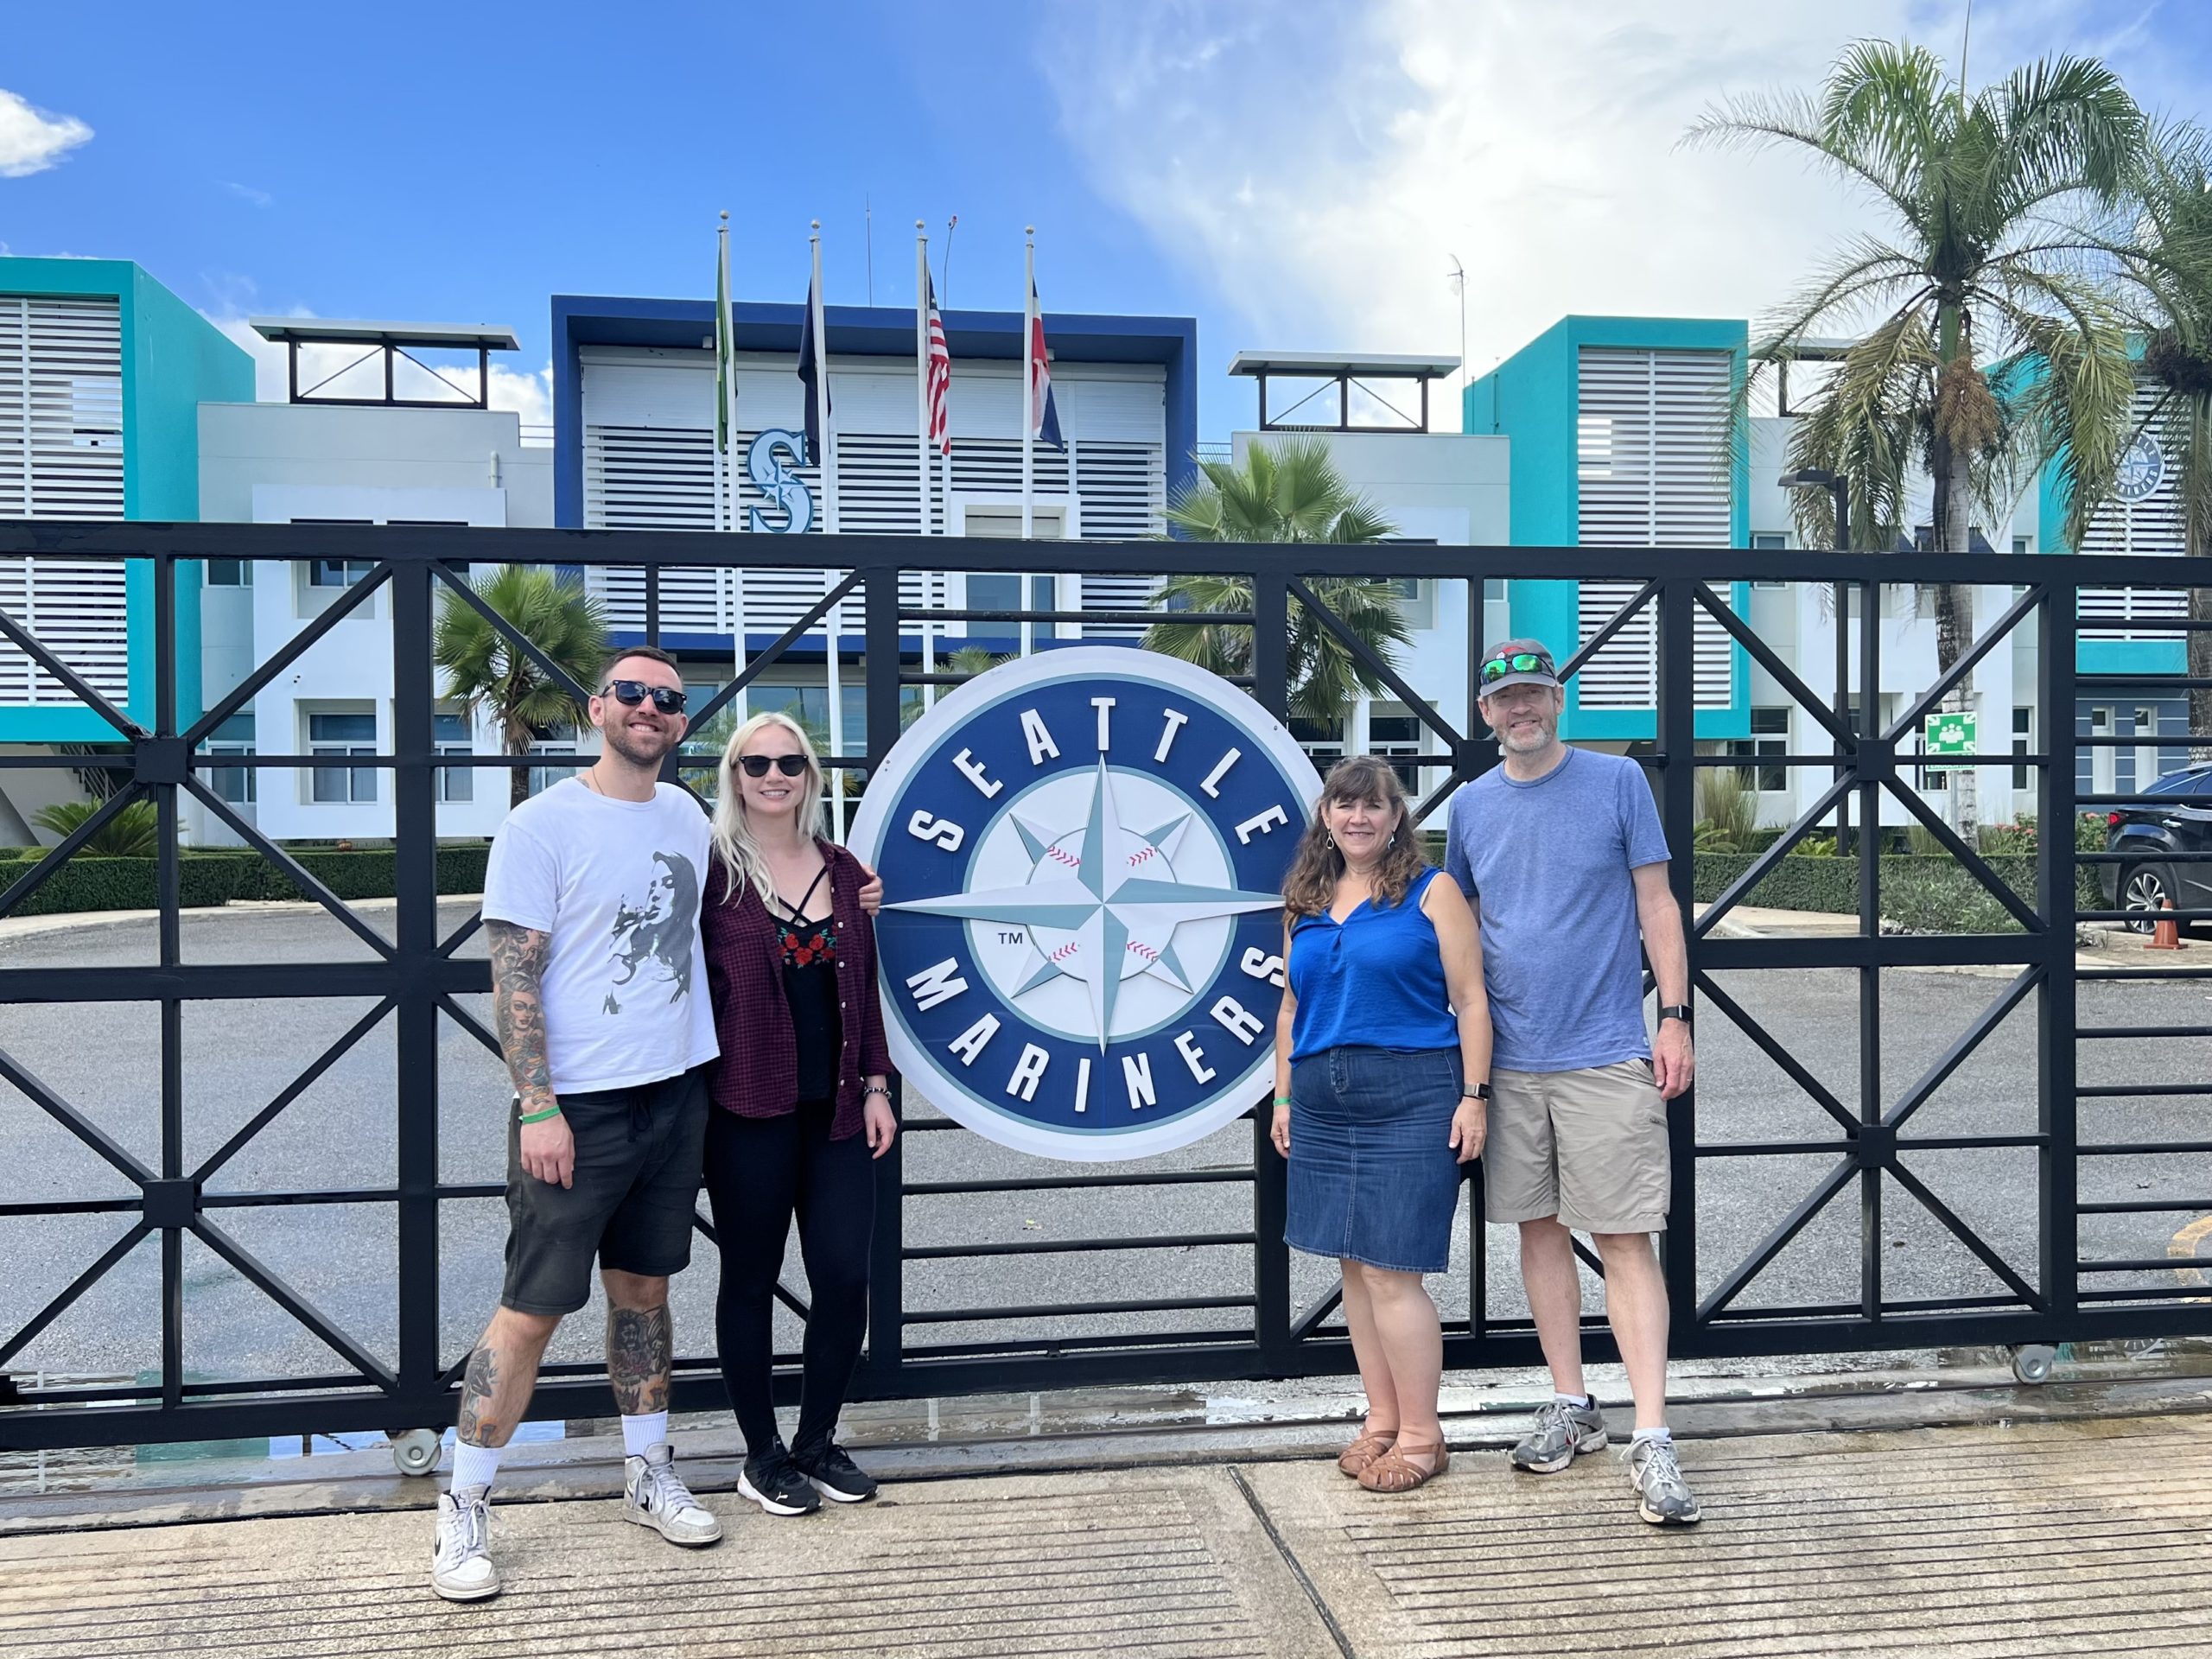 Matt, Erin, Rob, and Beth in front of the Dominican academy of their favorite team, the Seattle Mariners.